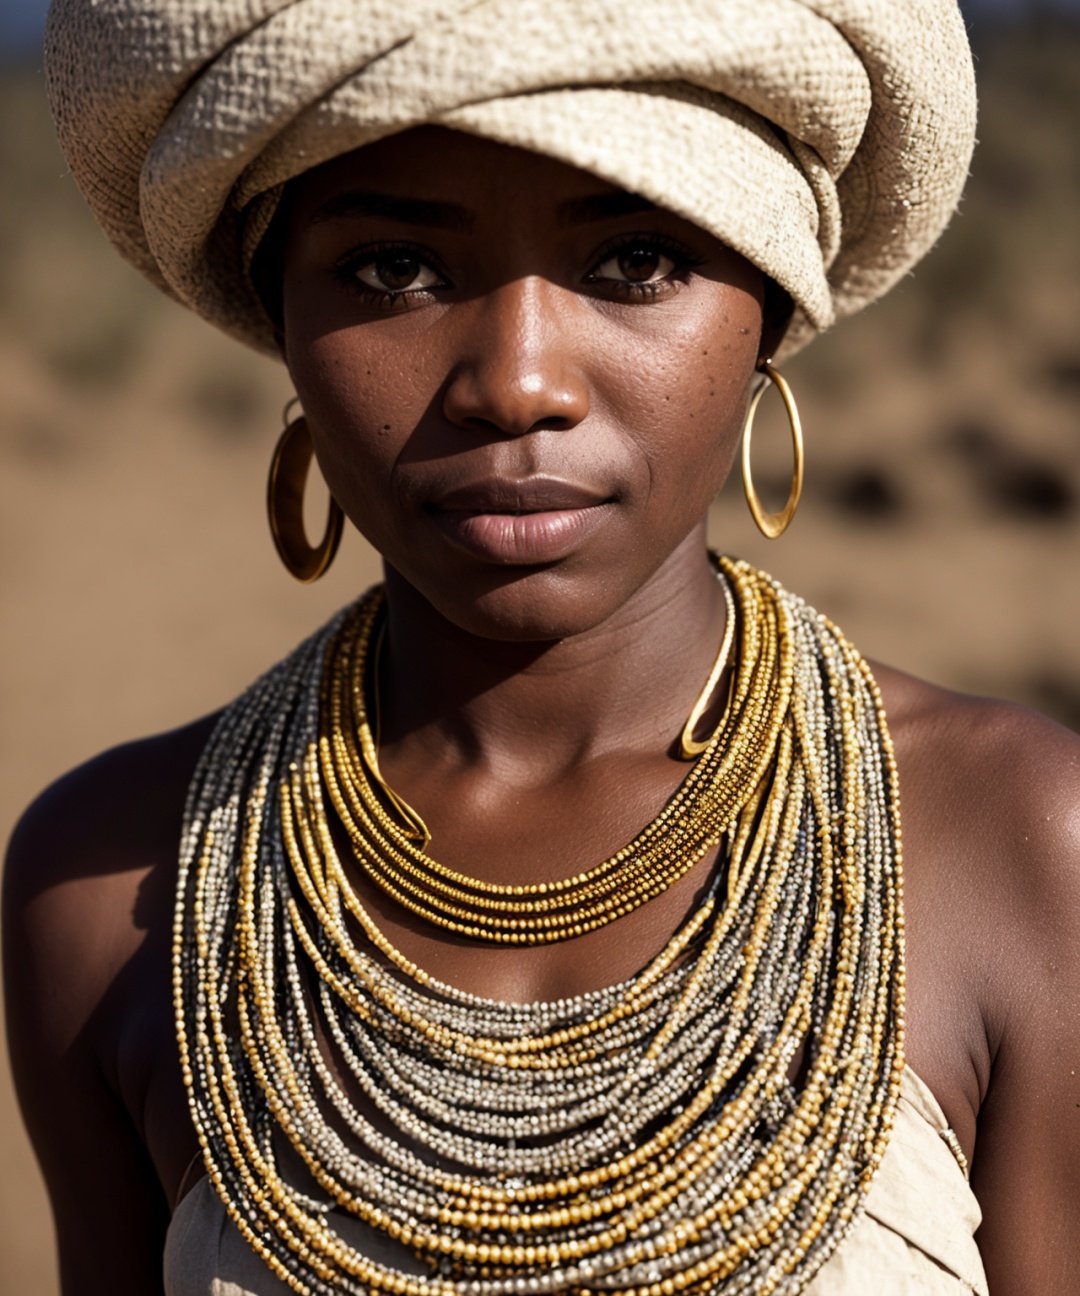 a congolese woman, necklace, crowded papers room, closeup, neutral colors, barren land